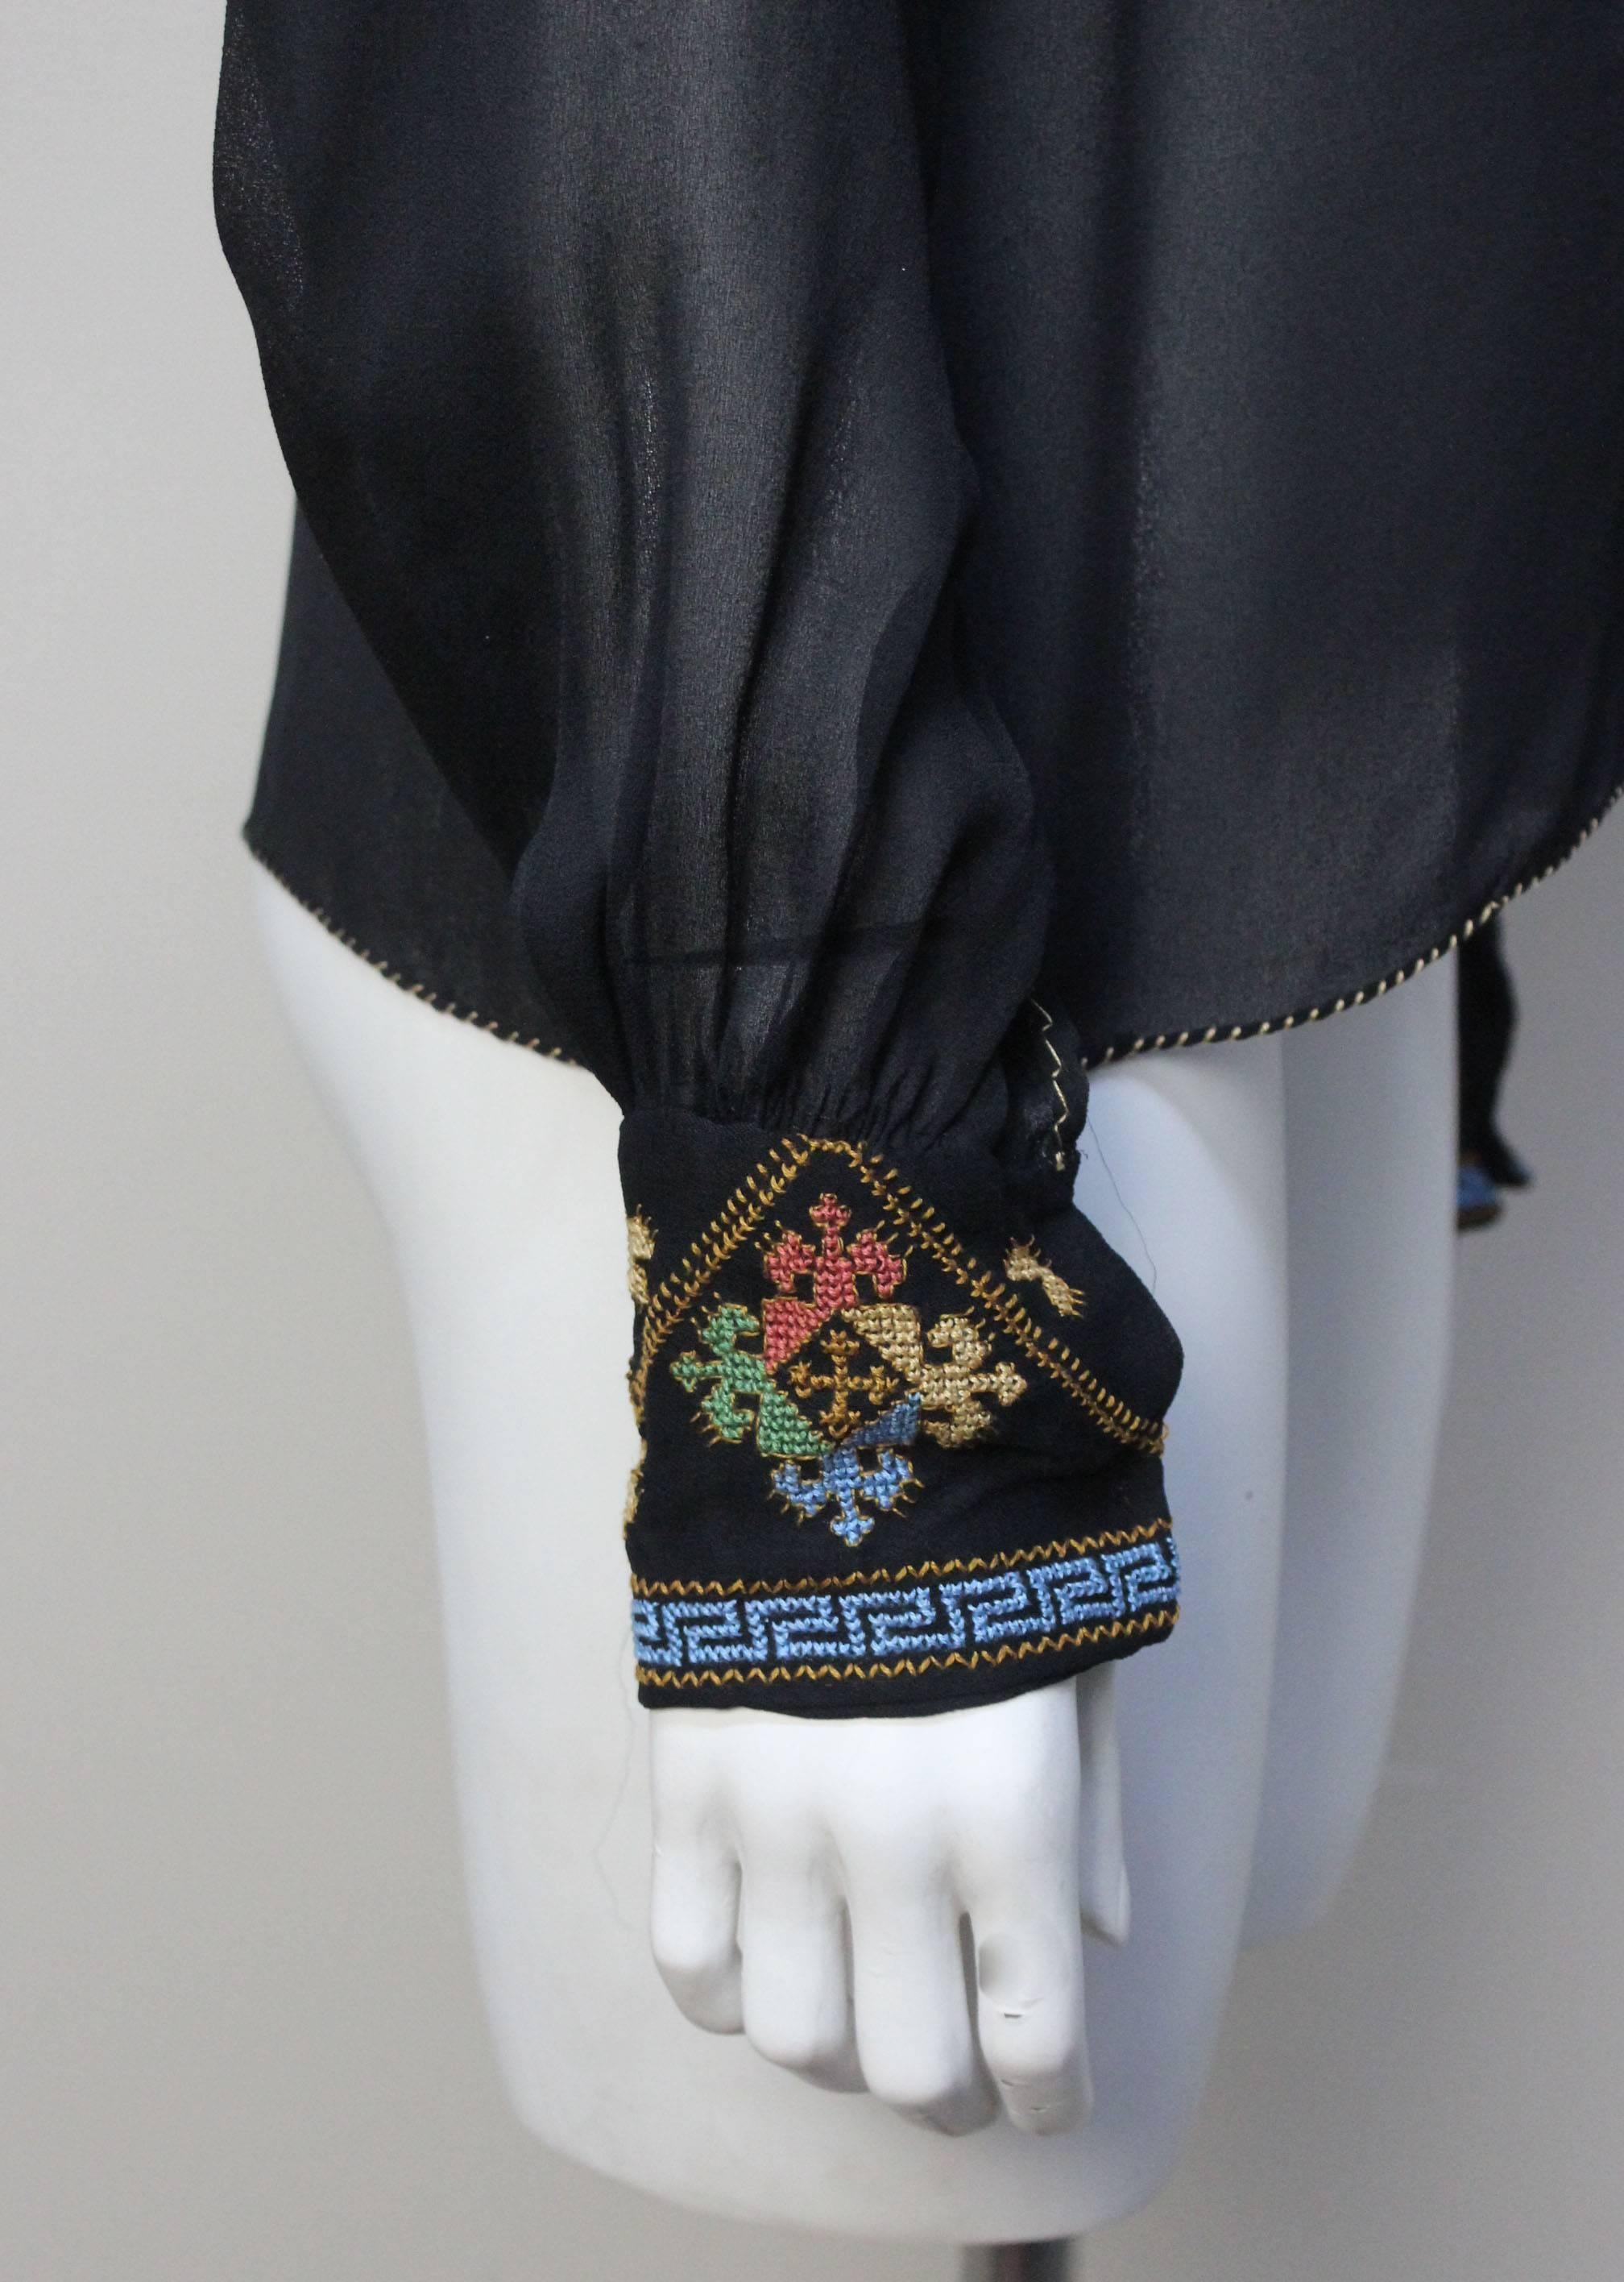 Exquisite Vintage Black Sheer Crepe Peasant Hand Embroidered Blouse 3